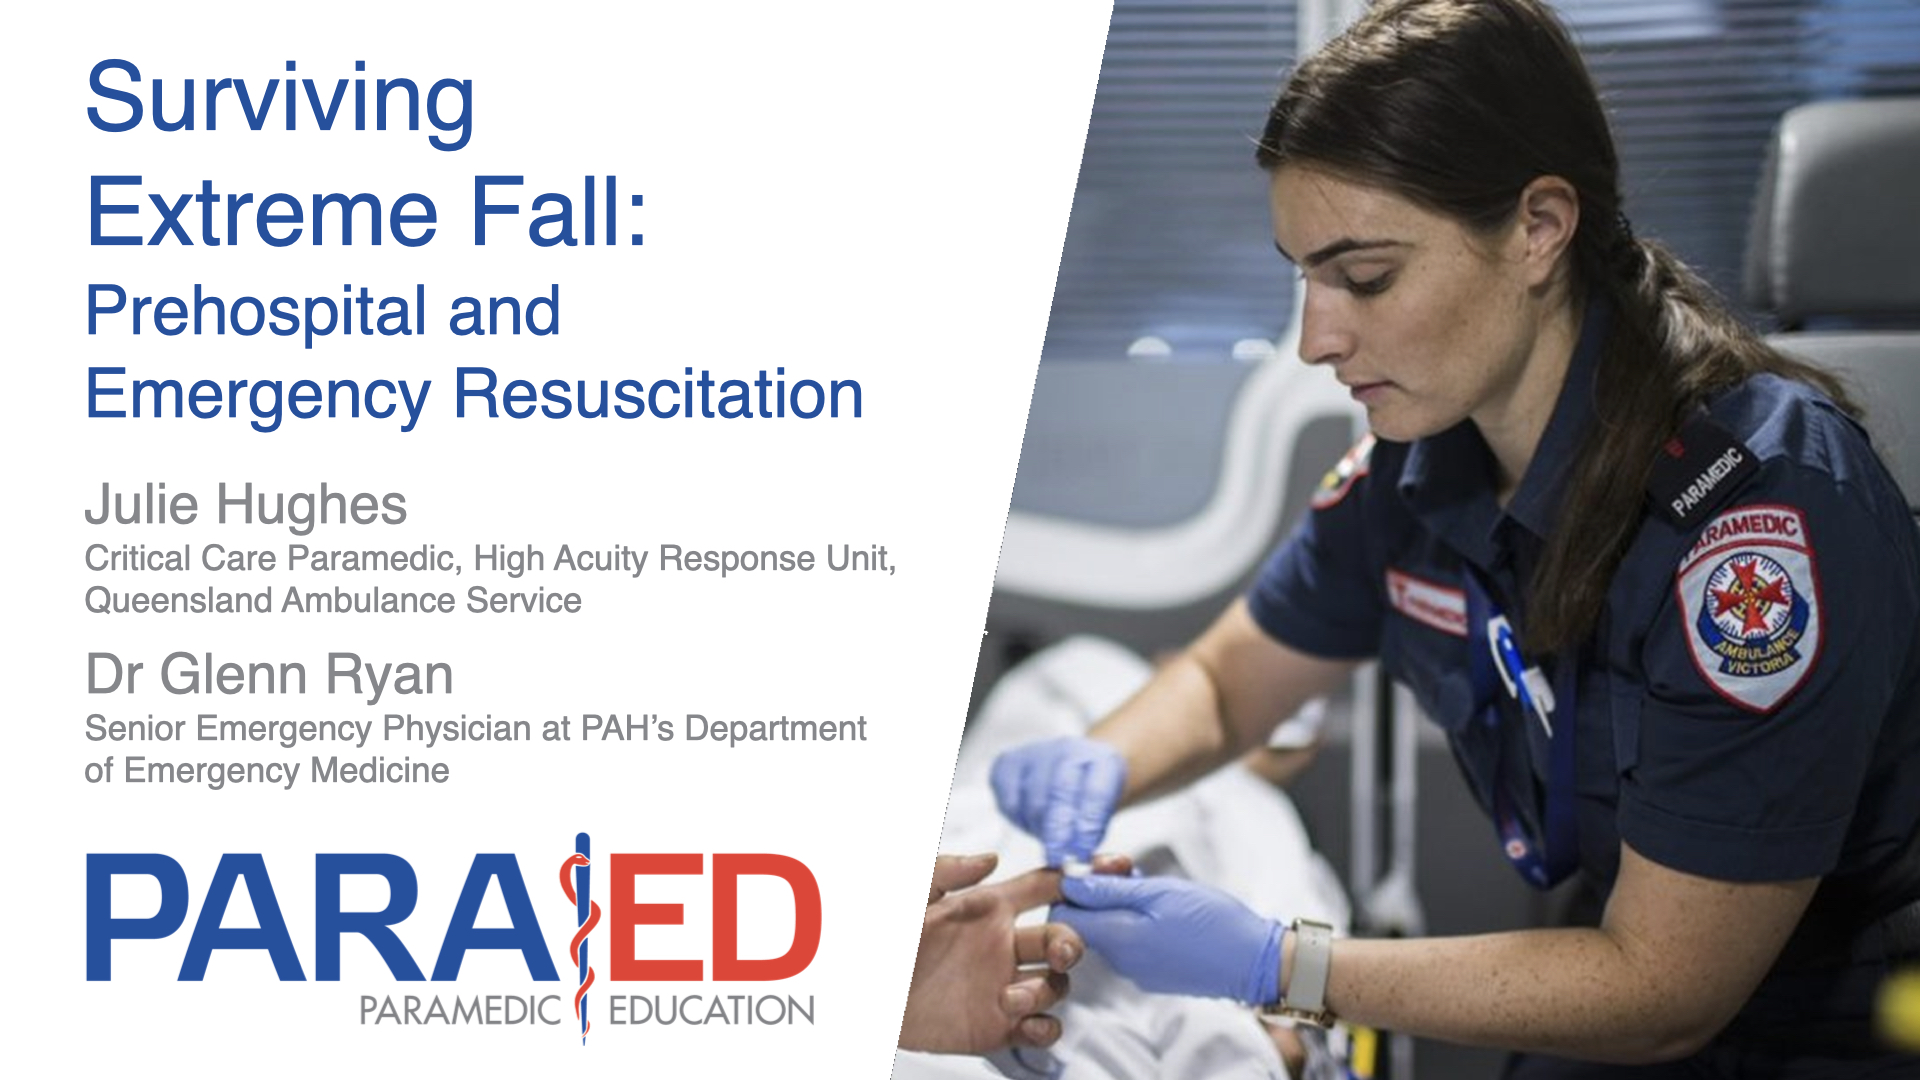 Surviving Extreme Fall: Prehospital and Emergency Resuscitation